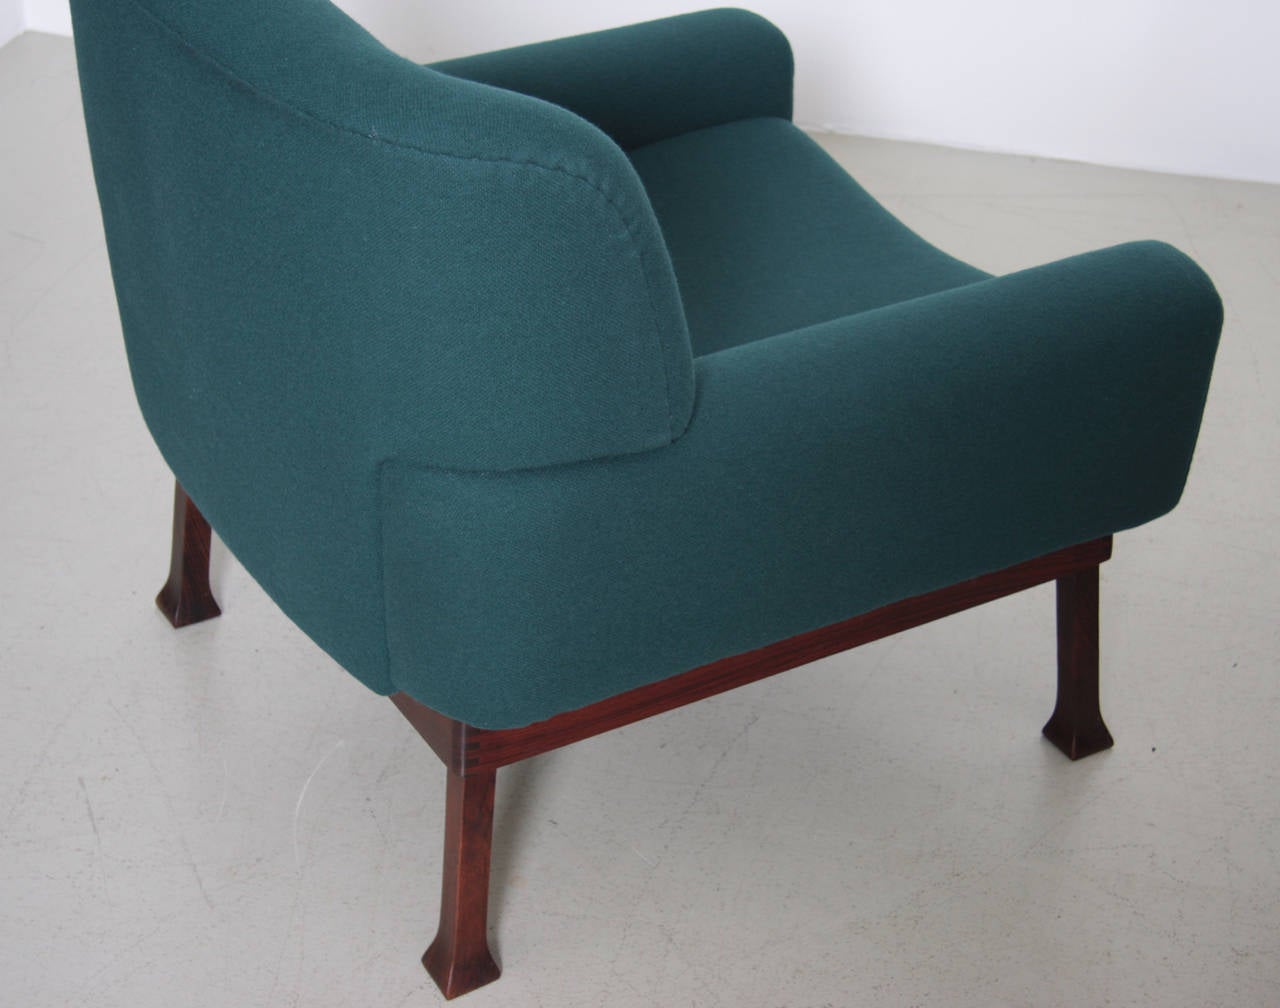 Pair of Allegra Armchairs by Piero Ranzani for Elam In Excellent Condition For Sale In Maastricht, NL